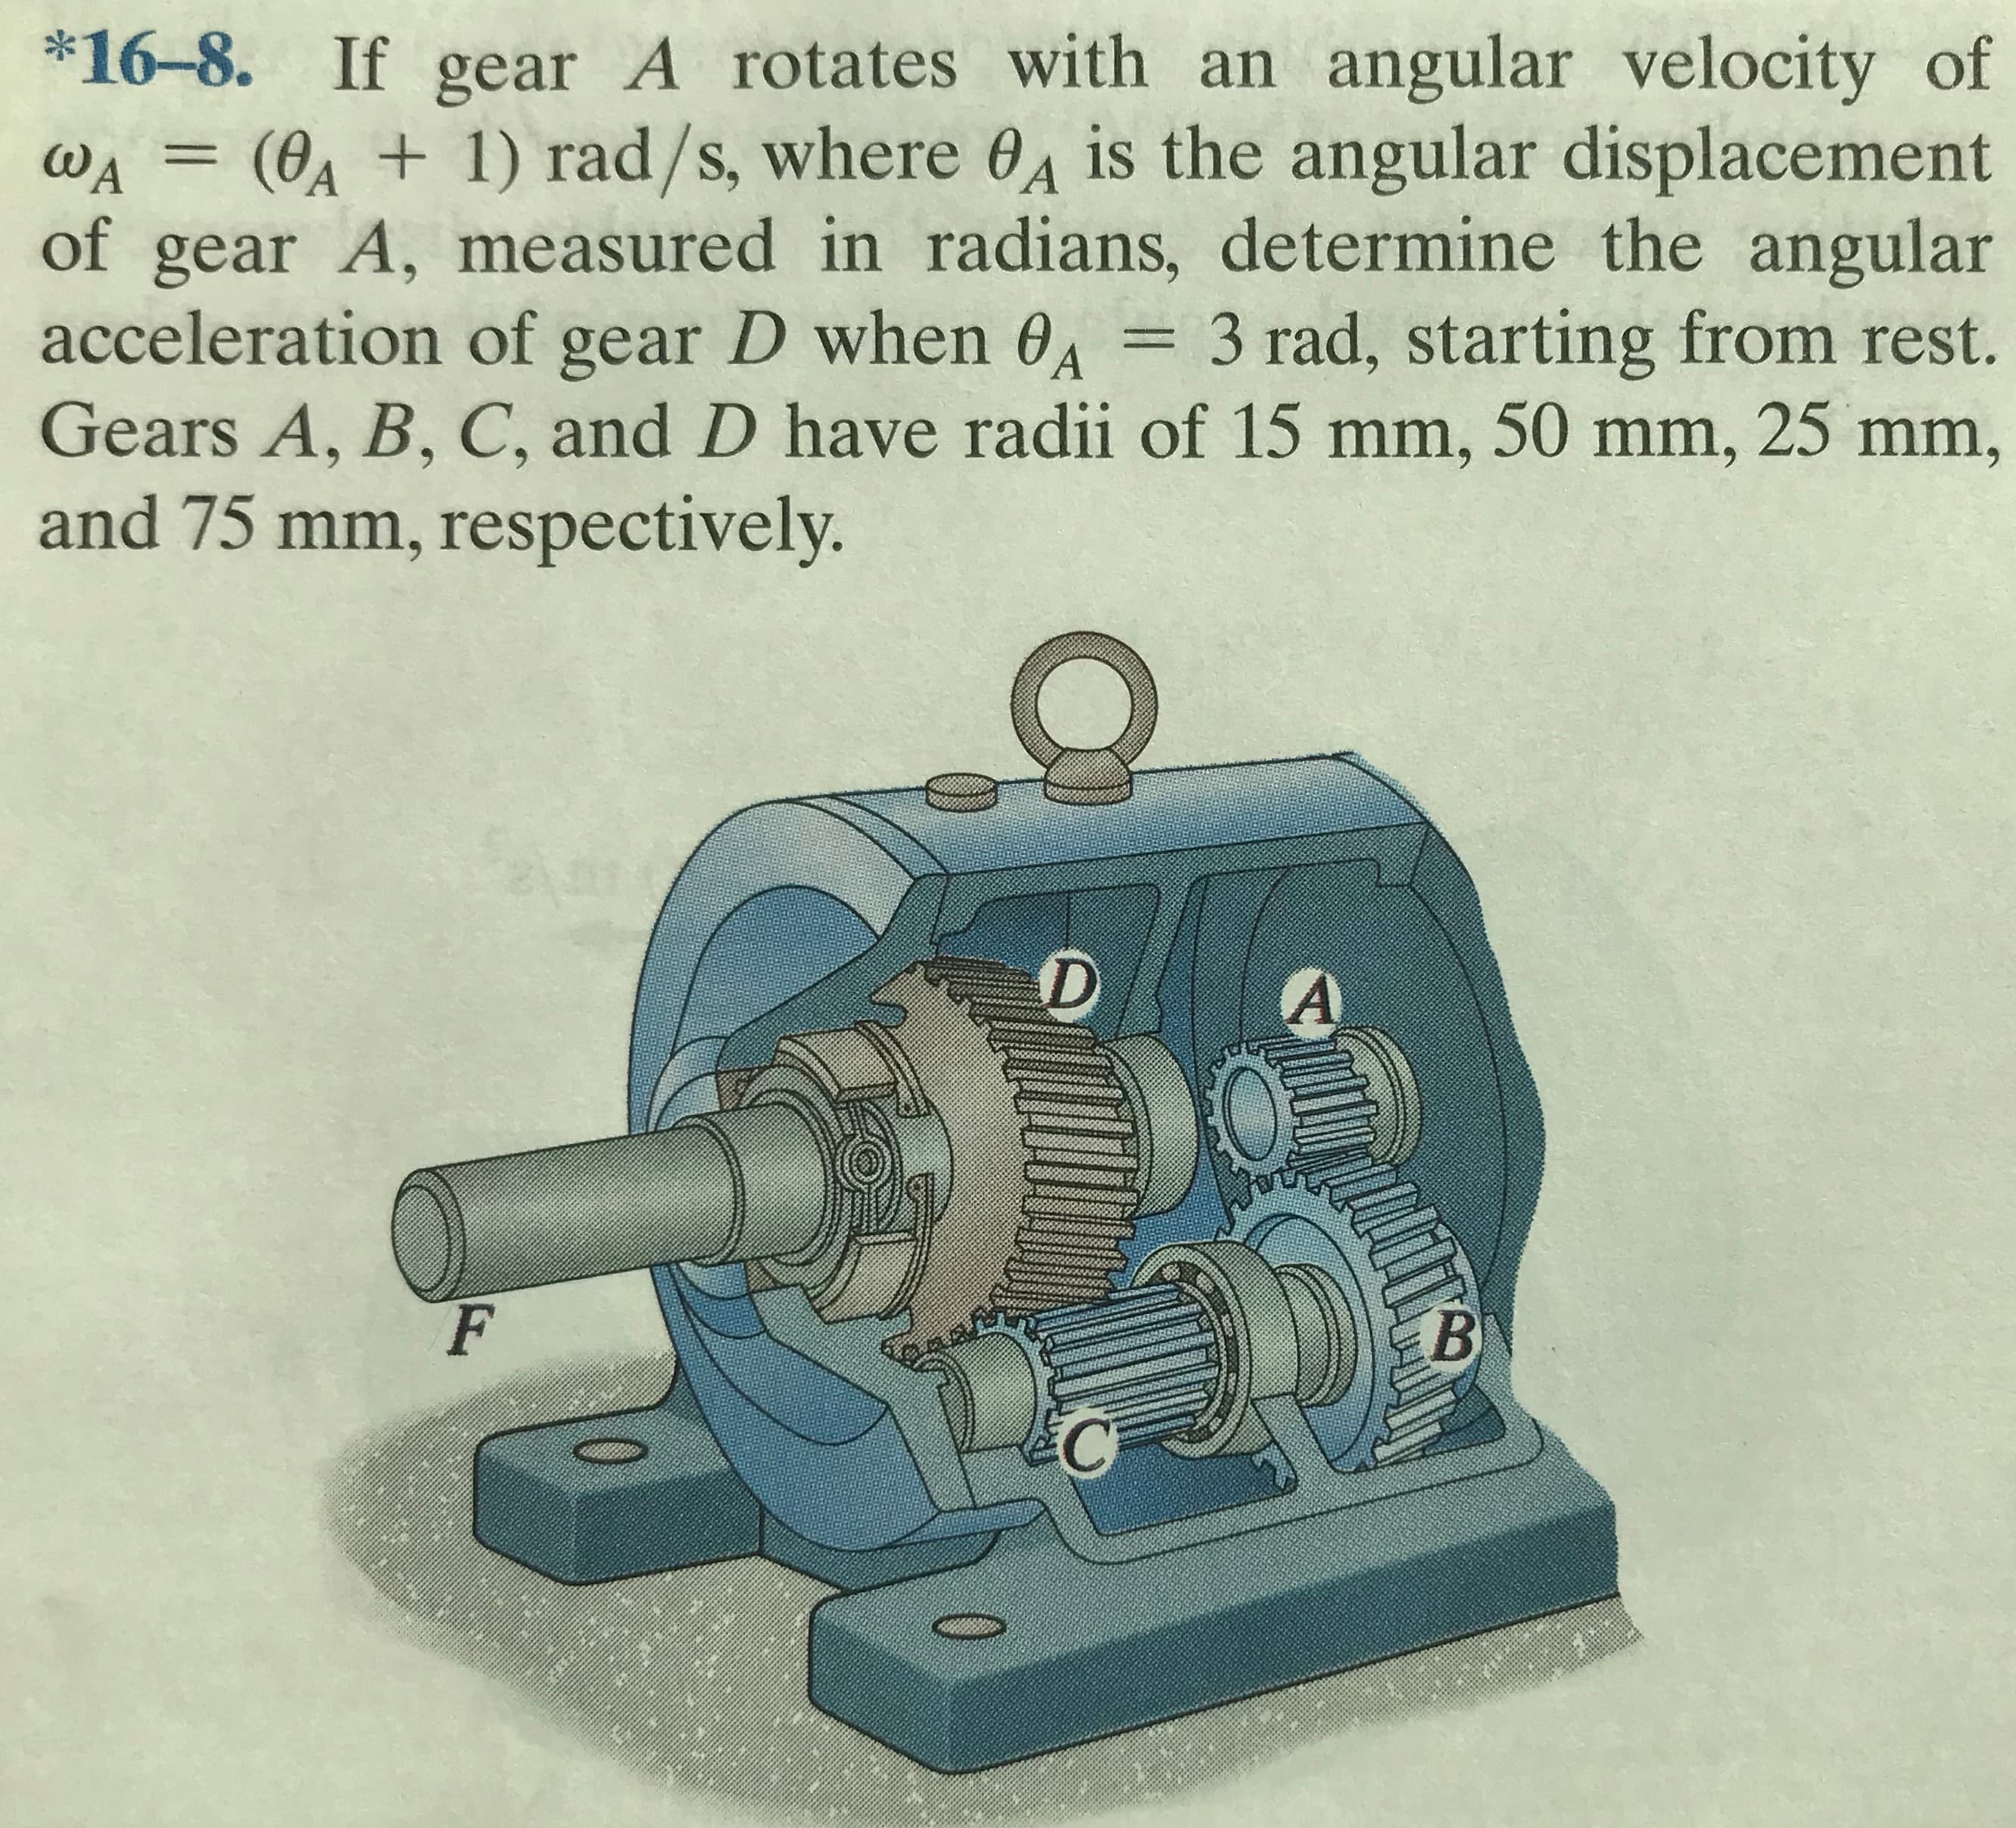 *16-8. If gear A rotates with an angular velocity of
wa = (0a + 1) rad/s, where 04 is the angular displacement
of gear A, measured in radians, determine the angular
acceleration of gear D when 0, = 3 rad, starting from rest.
Gears A, B, C, and D have radii of 15 mm, 50 mm, 25 mm,
WA
%3D
and 75 mm, respectively.
0
